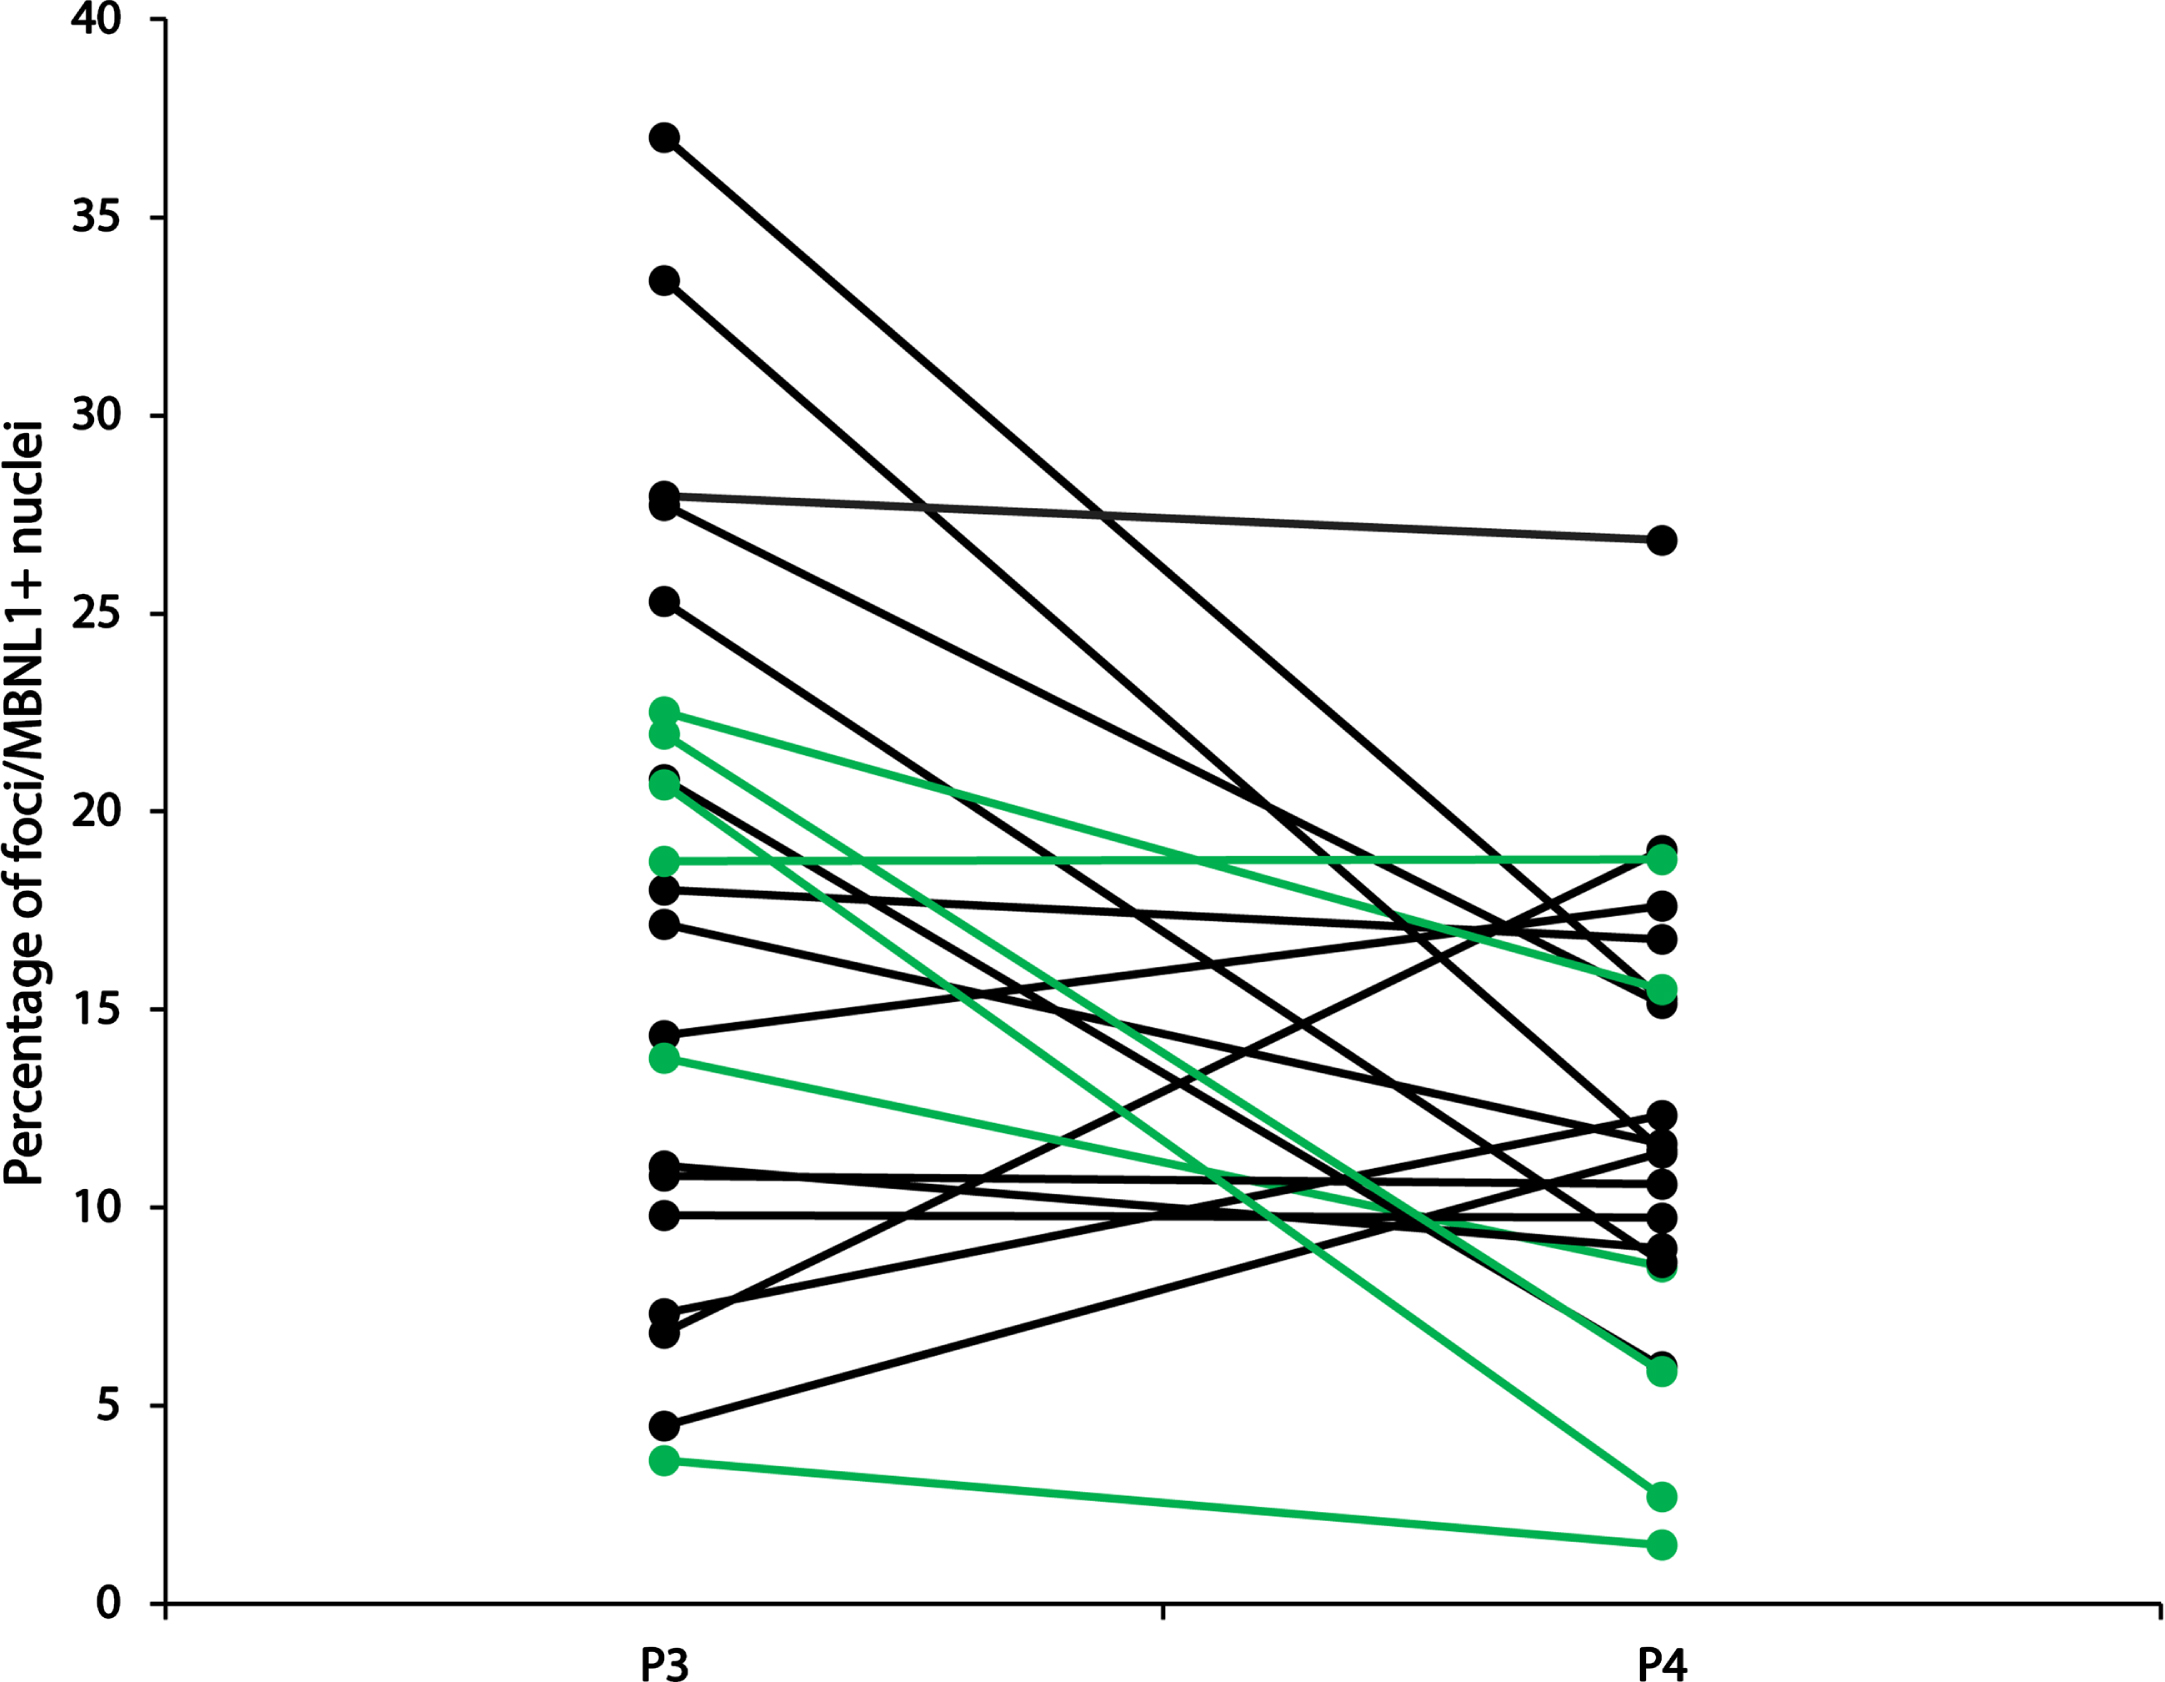 Percentage of foci/MBNL+ nuclei at P3 and P4. In green: participants who participated in a strength training program between P3 and P4. In black: all other participants.